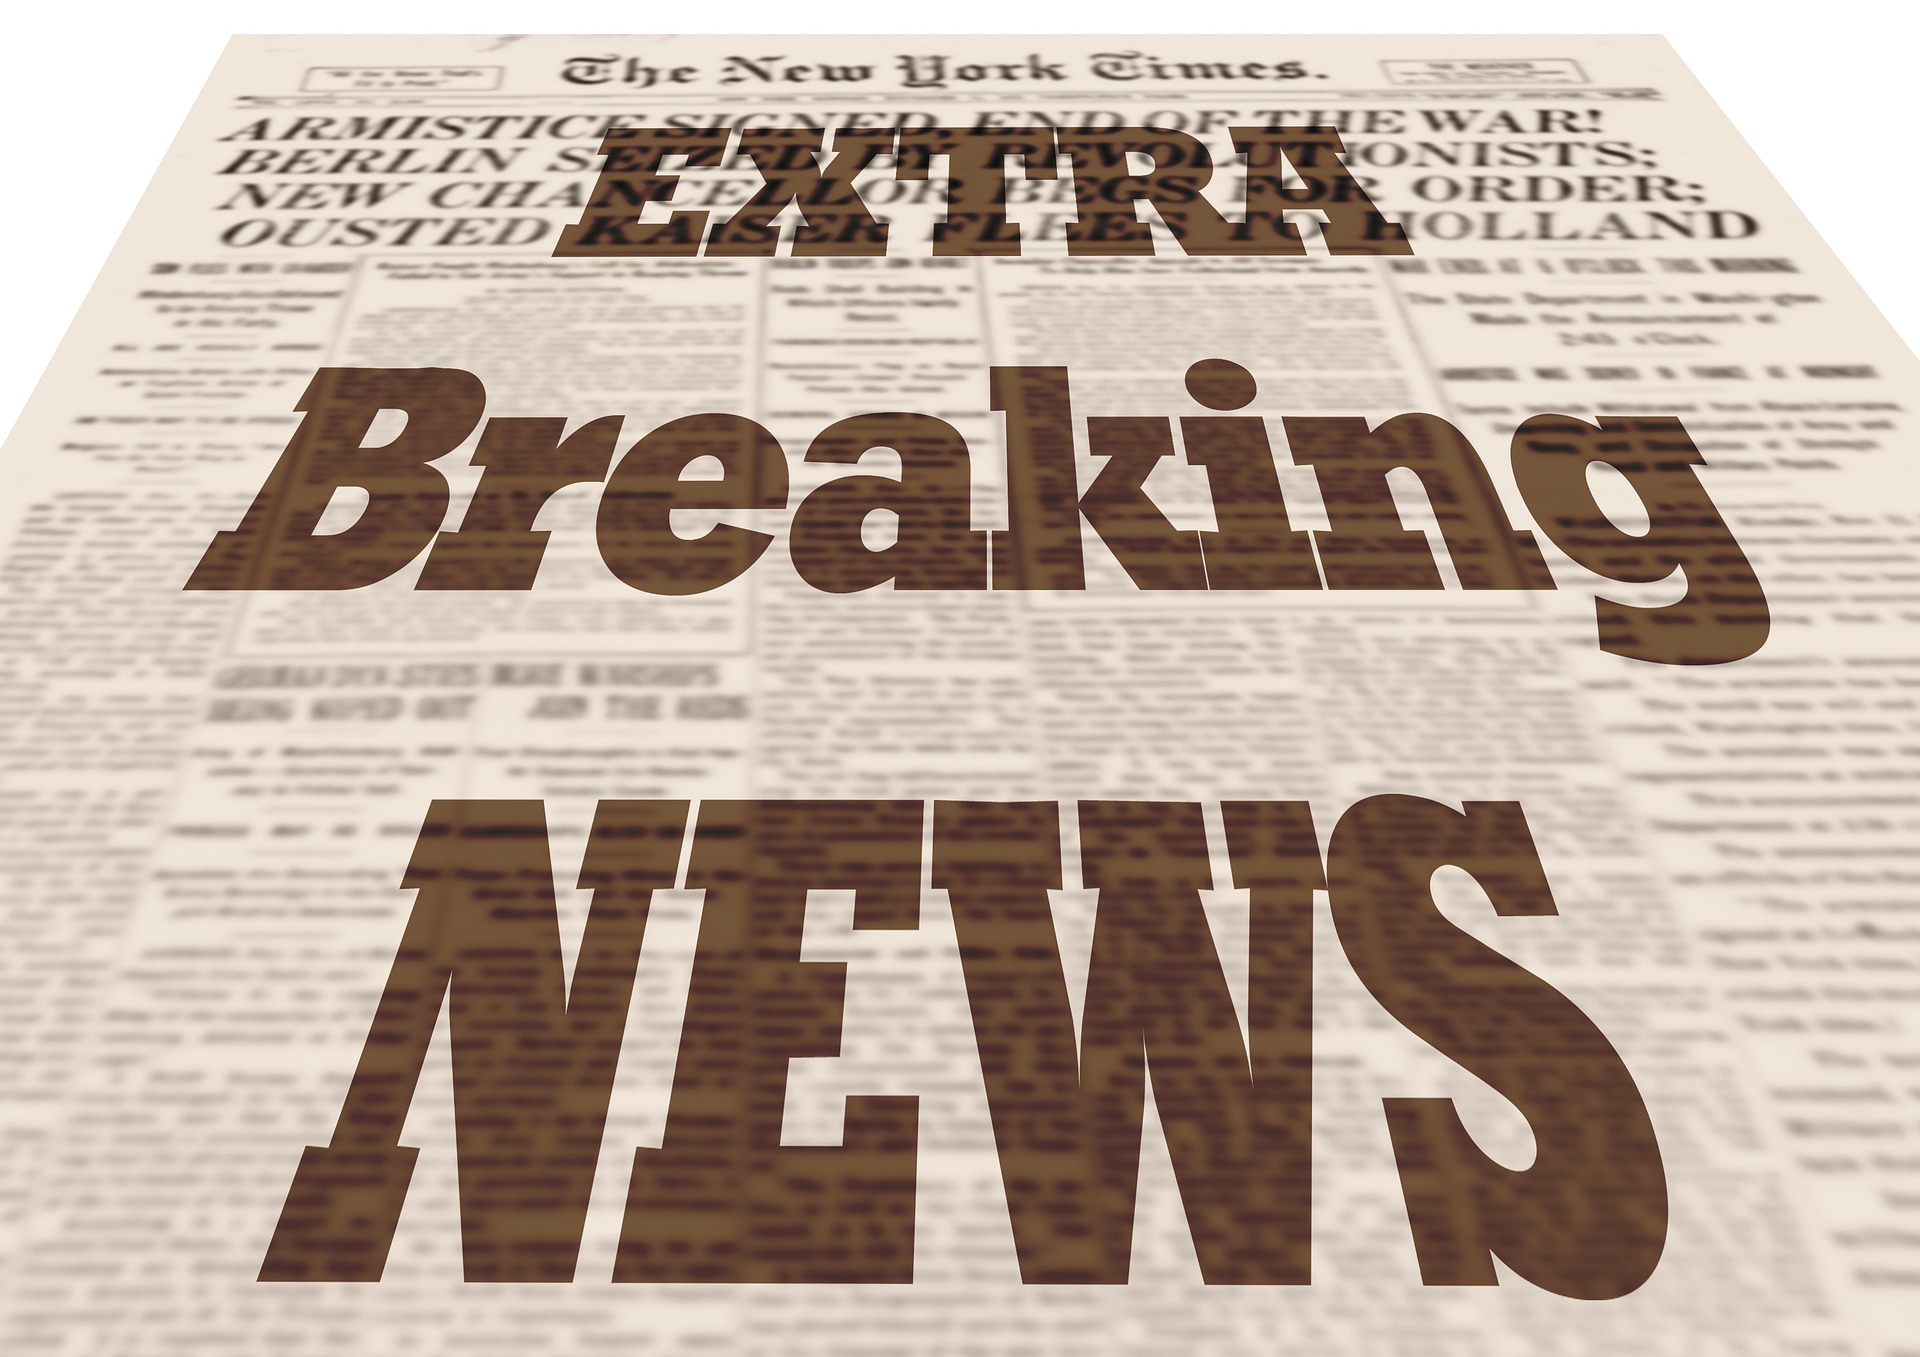 Breaking news front page graphic (Pic: Geralt/Pixabay)